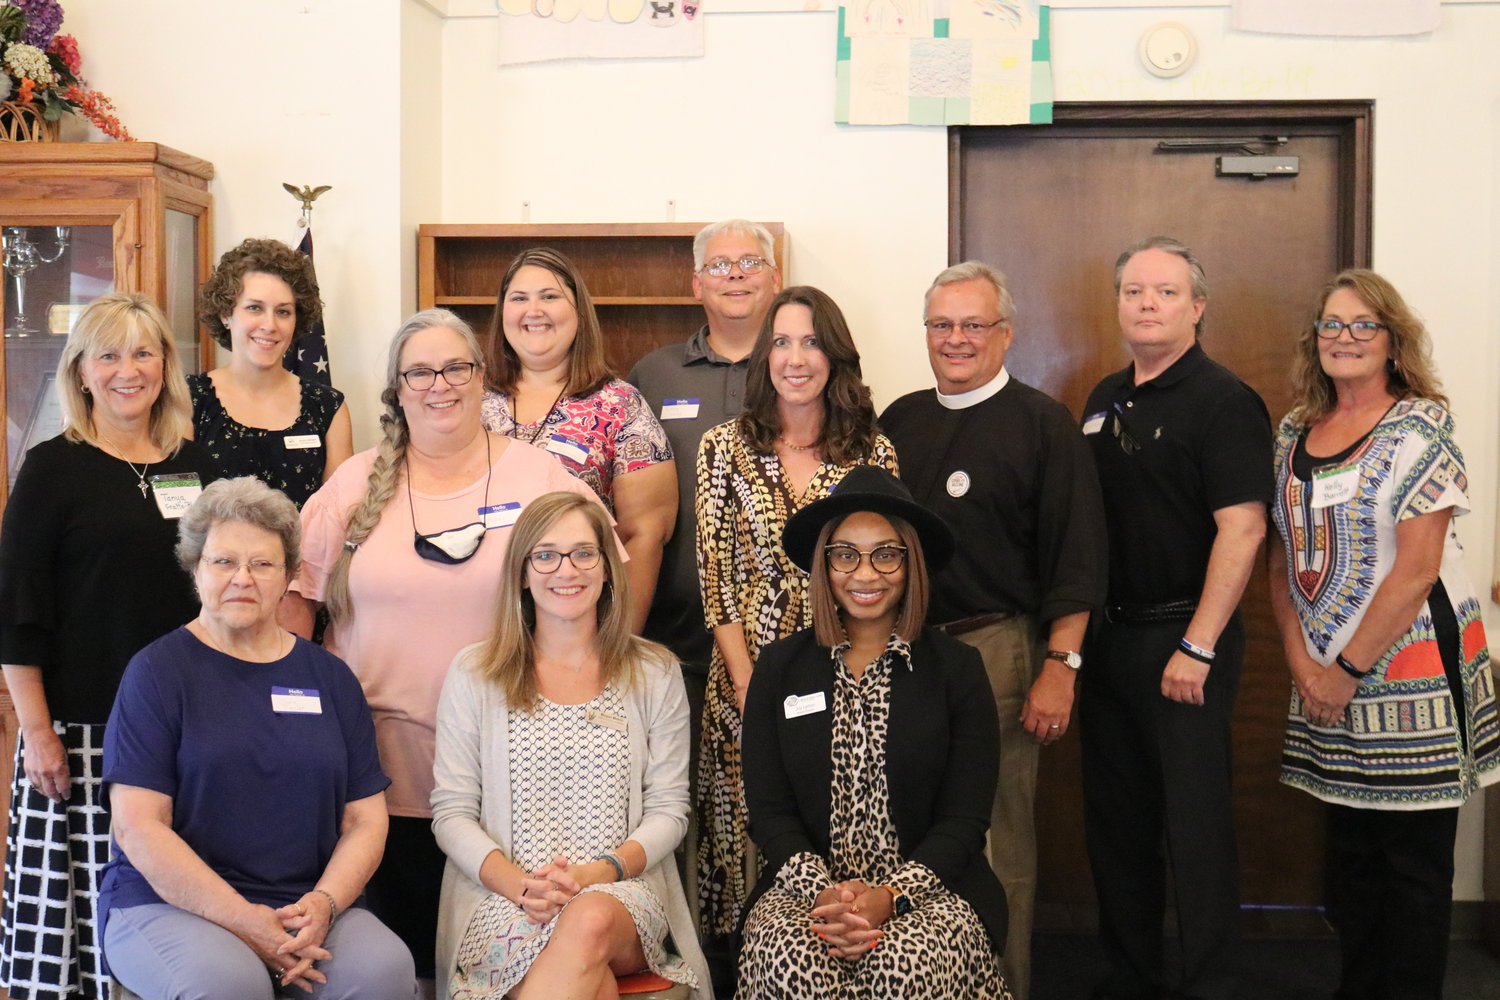 Pictured here, back row, from left: Foley Woman’s Club member Tanya Blair, Dana Jepsen with Ecumenical Ministries, Tammy Kinney with the Baldwin County Heritage Museum, Emily Thompson with Foley Middle School/Project REACH, Larry Lewey with Baldwin County Sheriff’s Boys Ranch, Jessica Ware with Baldwin County CARE House, Pastor Brent Norris with St. Paul’s Episcopal Church, John Jackson with Foley Public Library, and Foley Woman’s Club President Kelly Barrett.
Front row, from left: June Taylor, Chairwoman of the Baldwin County Heritage Museum Board, Megan Melvin with Jennifer Claire Moore Foundation, and Joy Lymon with Foley Boys & Girls Club.